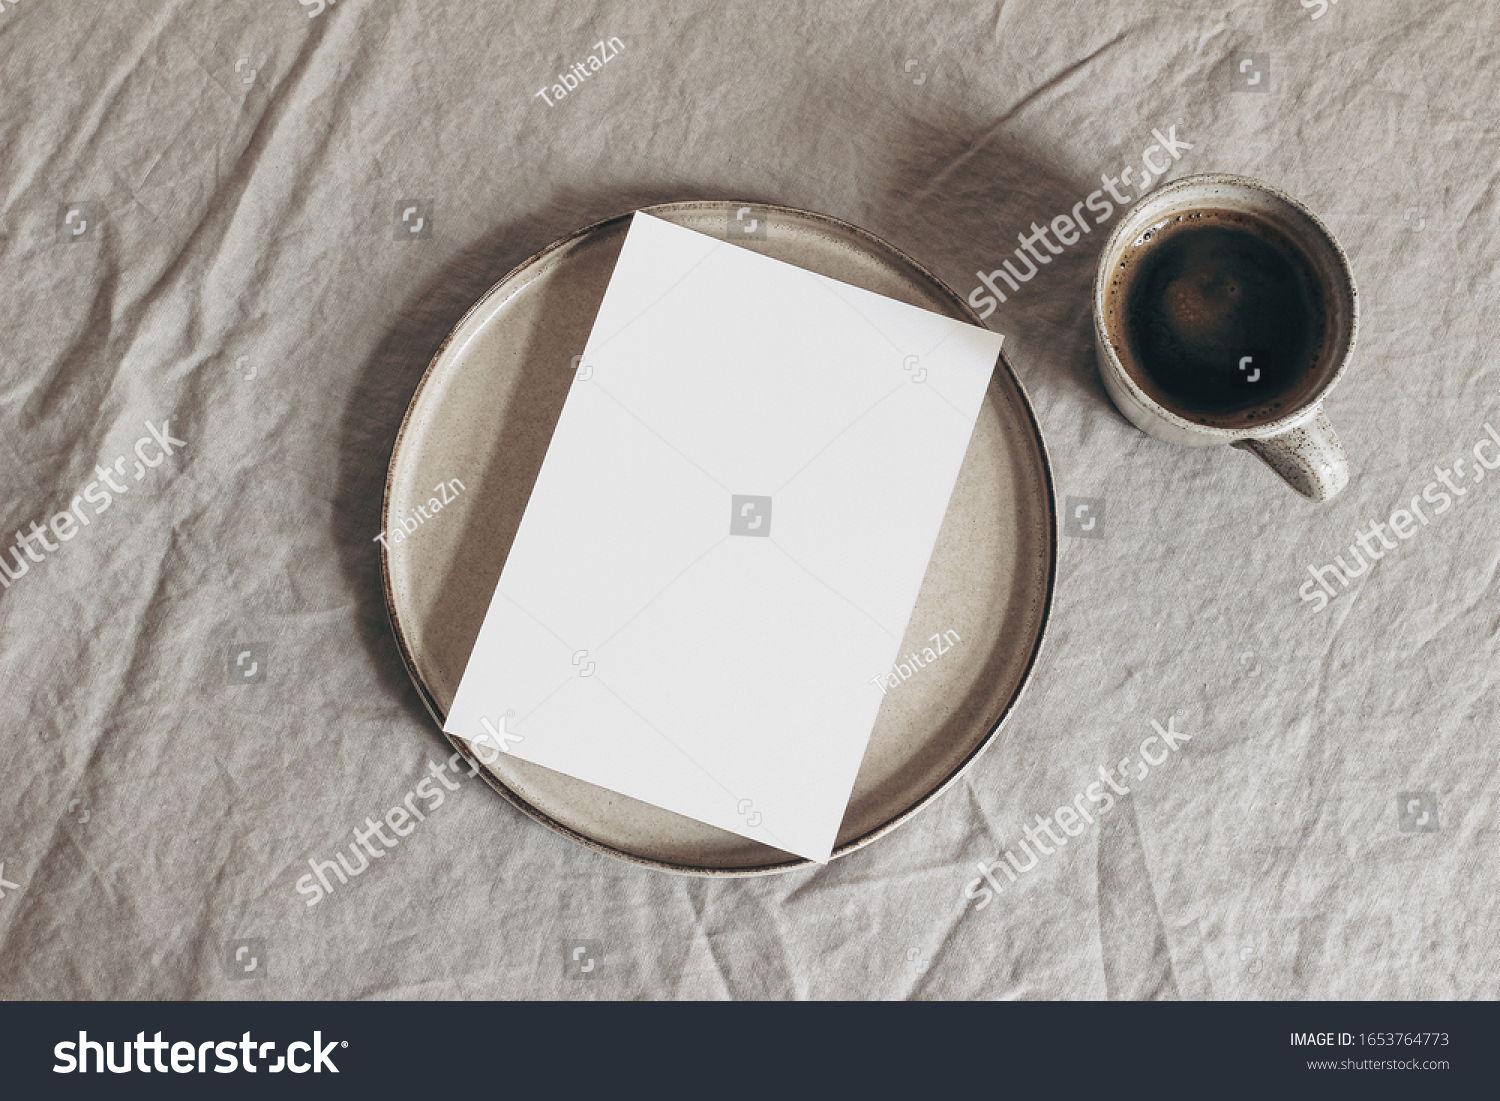 Cup of coffee and blank greeting card, invitation on ceramic plate. Moody breakfast table mockup scene. Beige linen tablecloth background. Sparse still life composition  Rustic flat lay, top view. #1653764773